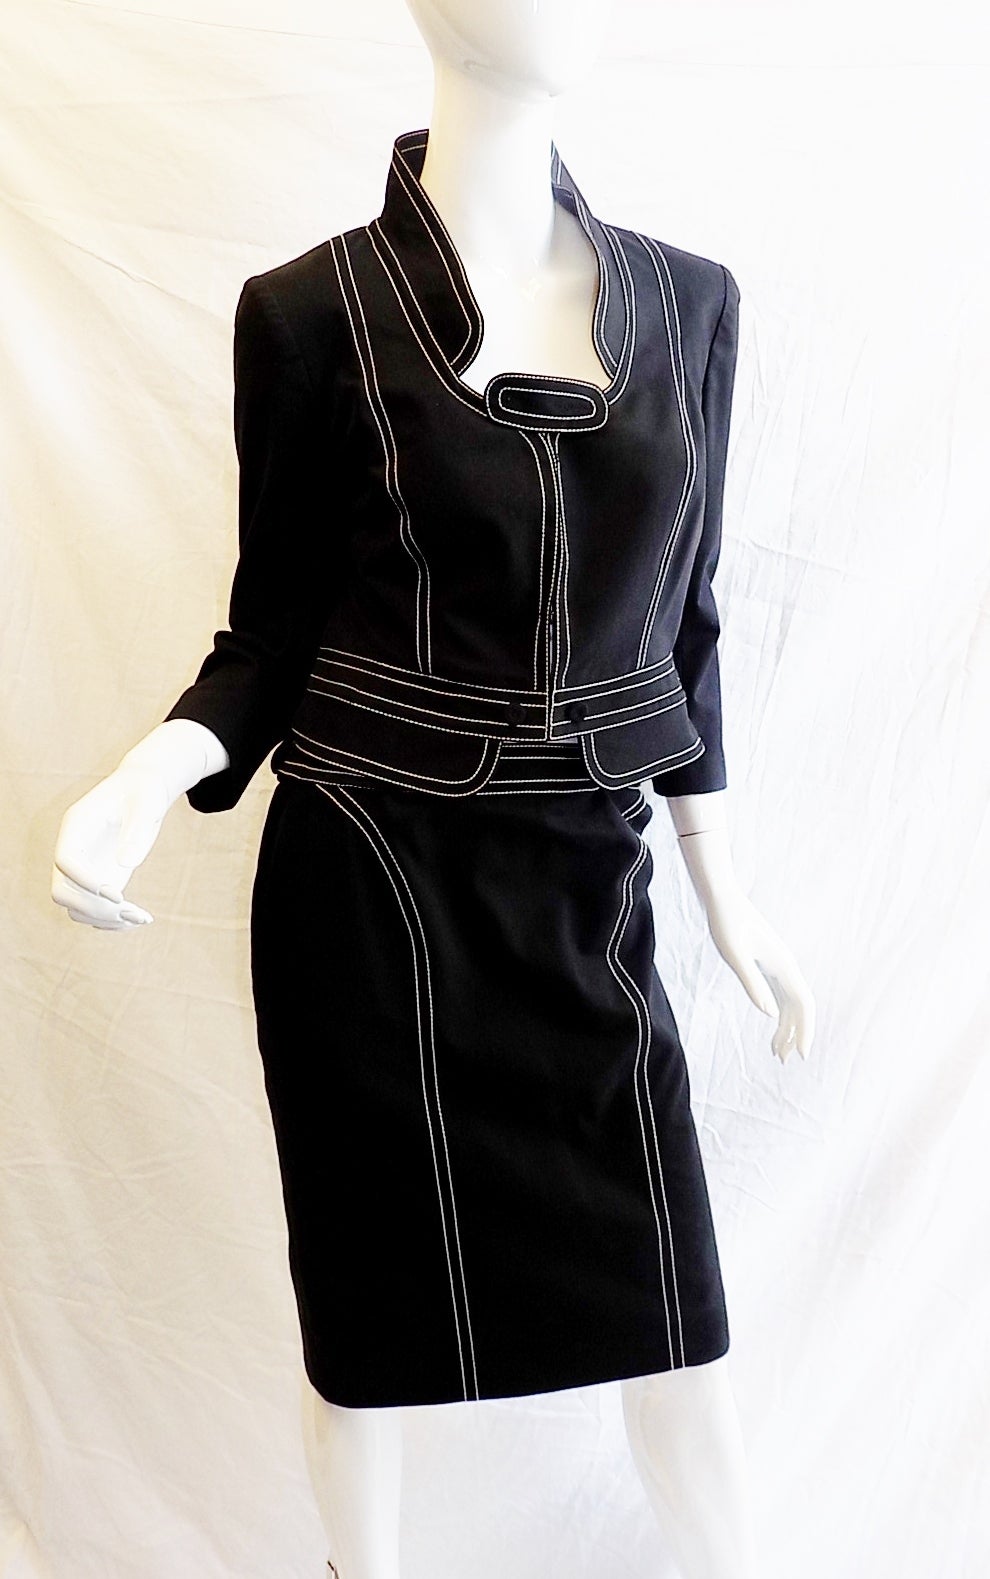 Barely worn in absolutely mint condition!! 
Sublime Givenchy Vintage Black Cotton skirt suit with White stitching . Cotton poplin lining. Hook and Eye front concealed closure. Incredible details and design! 
95% cotton, 5% elastine
Size